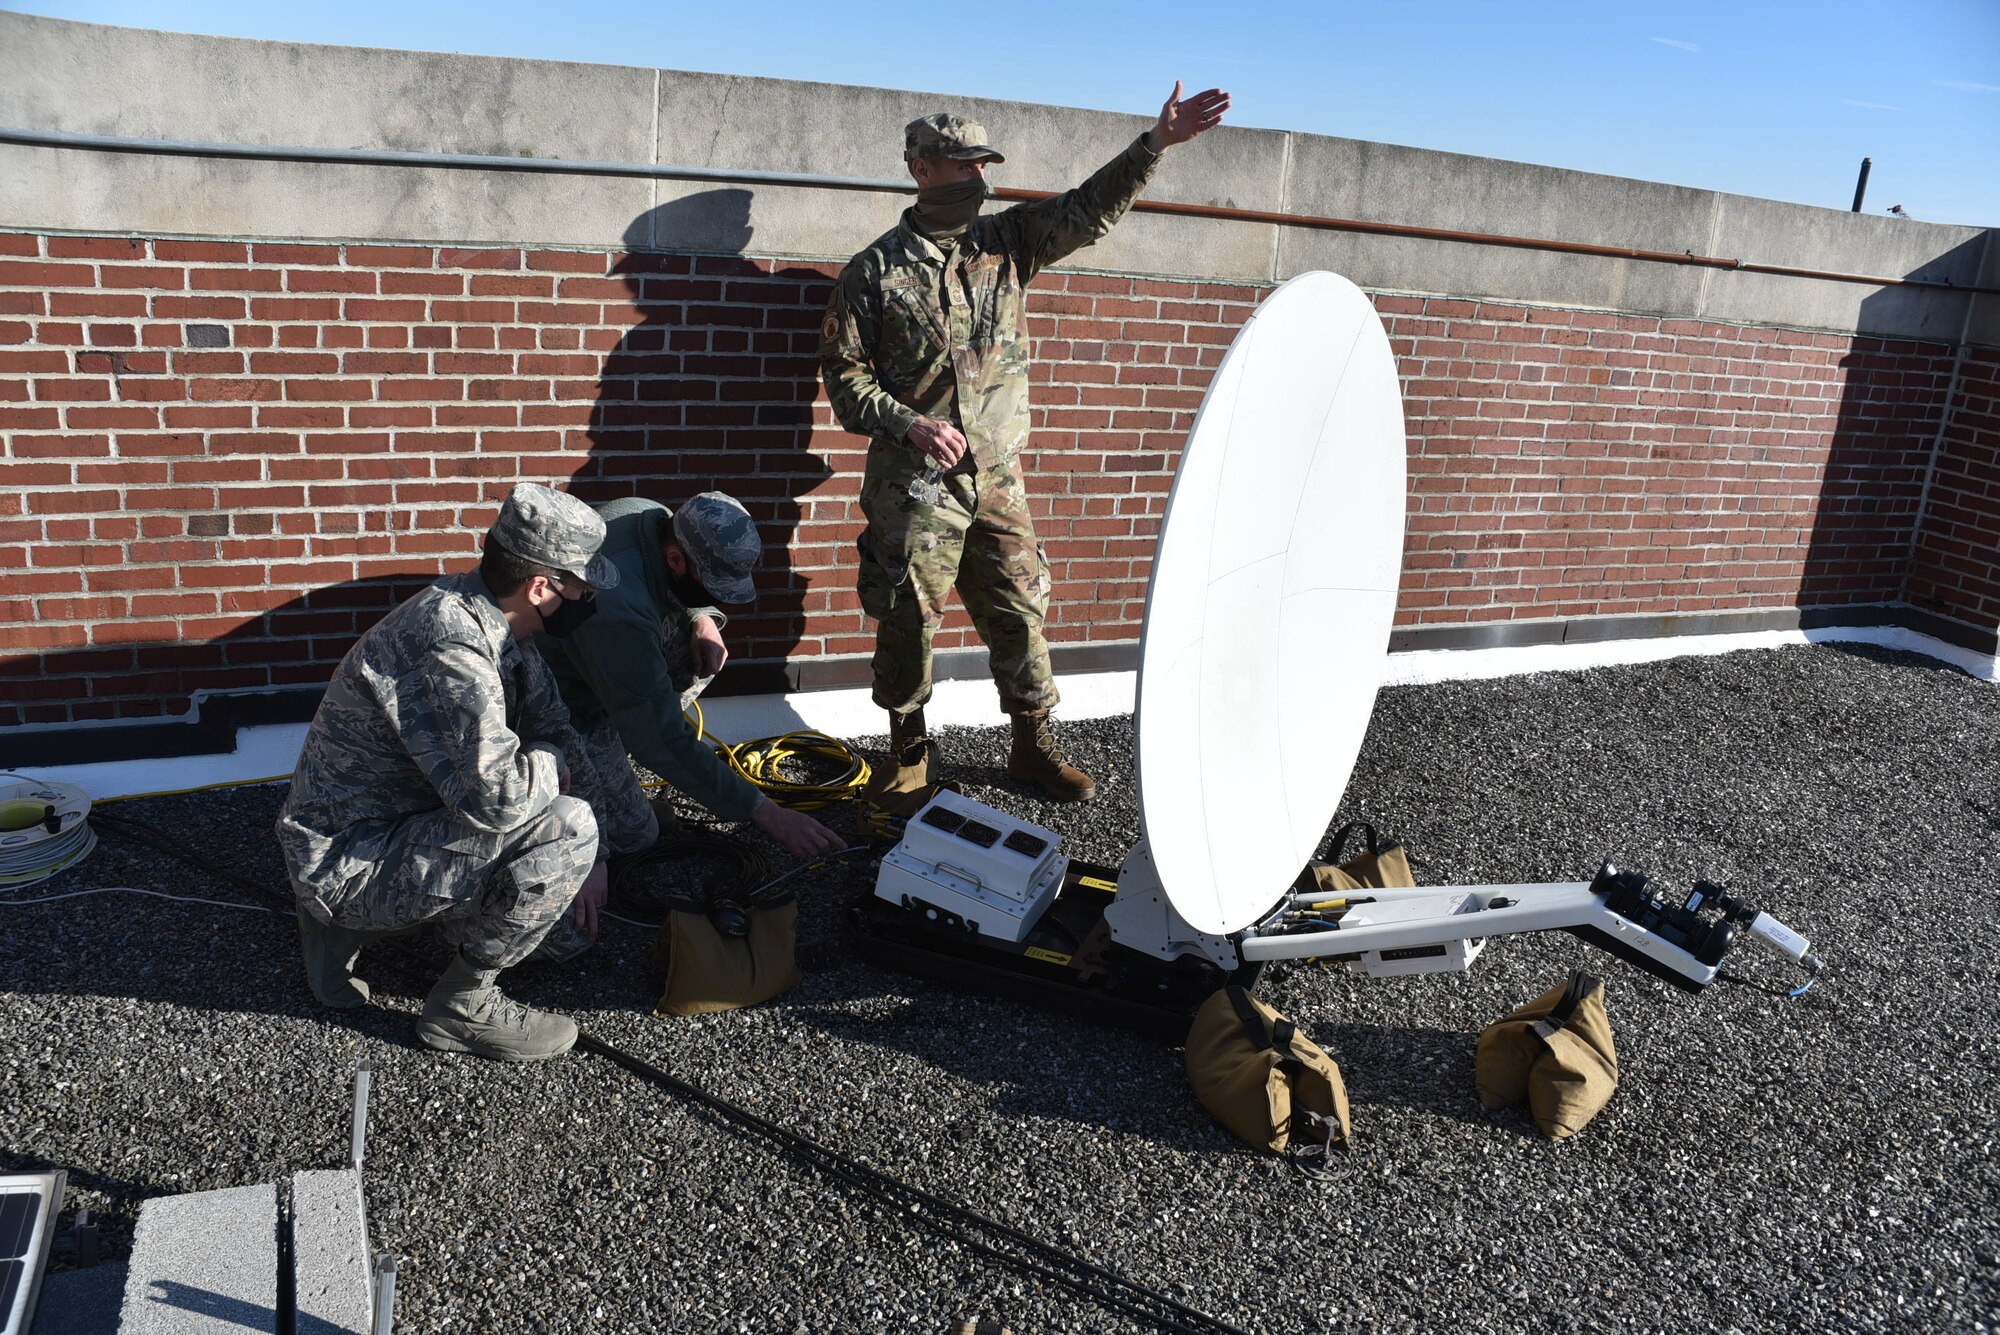 Members of the 111th Attack Wing Communications Squadron and the 271st Combat Communications Squadron, Horsham Air Guard Station, Pa., begin the procedure of setting up satellite communications at the District of Colombia National Guard’s Joint Force Headquarters in Washington, D.C., on Jan. 10, 2021, while supporting Operation Capitol Response-PA.